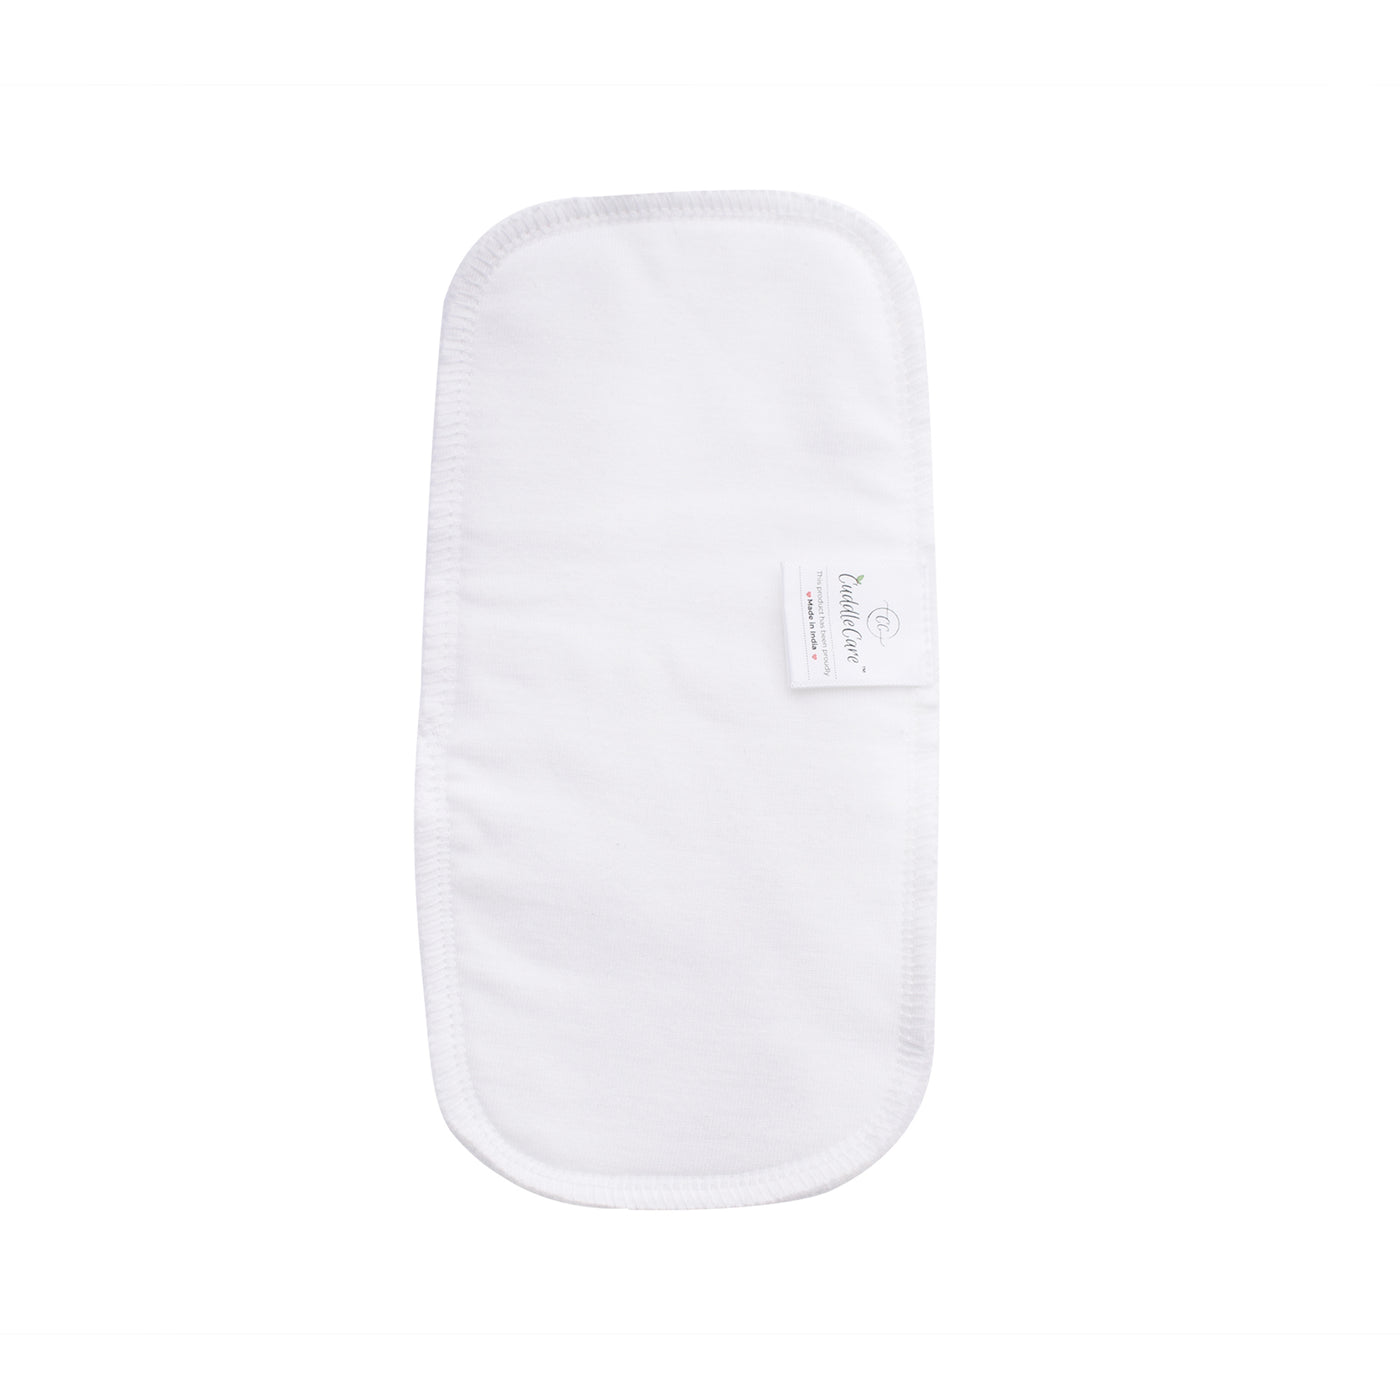 Duo New Born Cloth Diaper Moon-pie with Insert